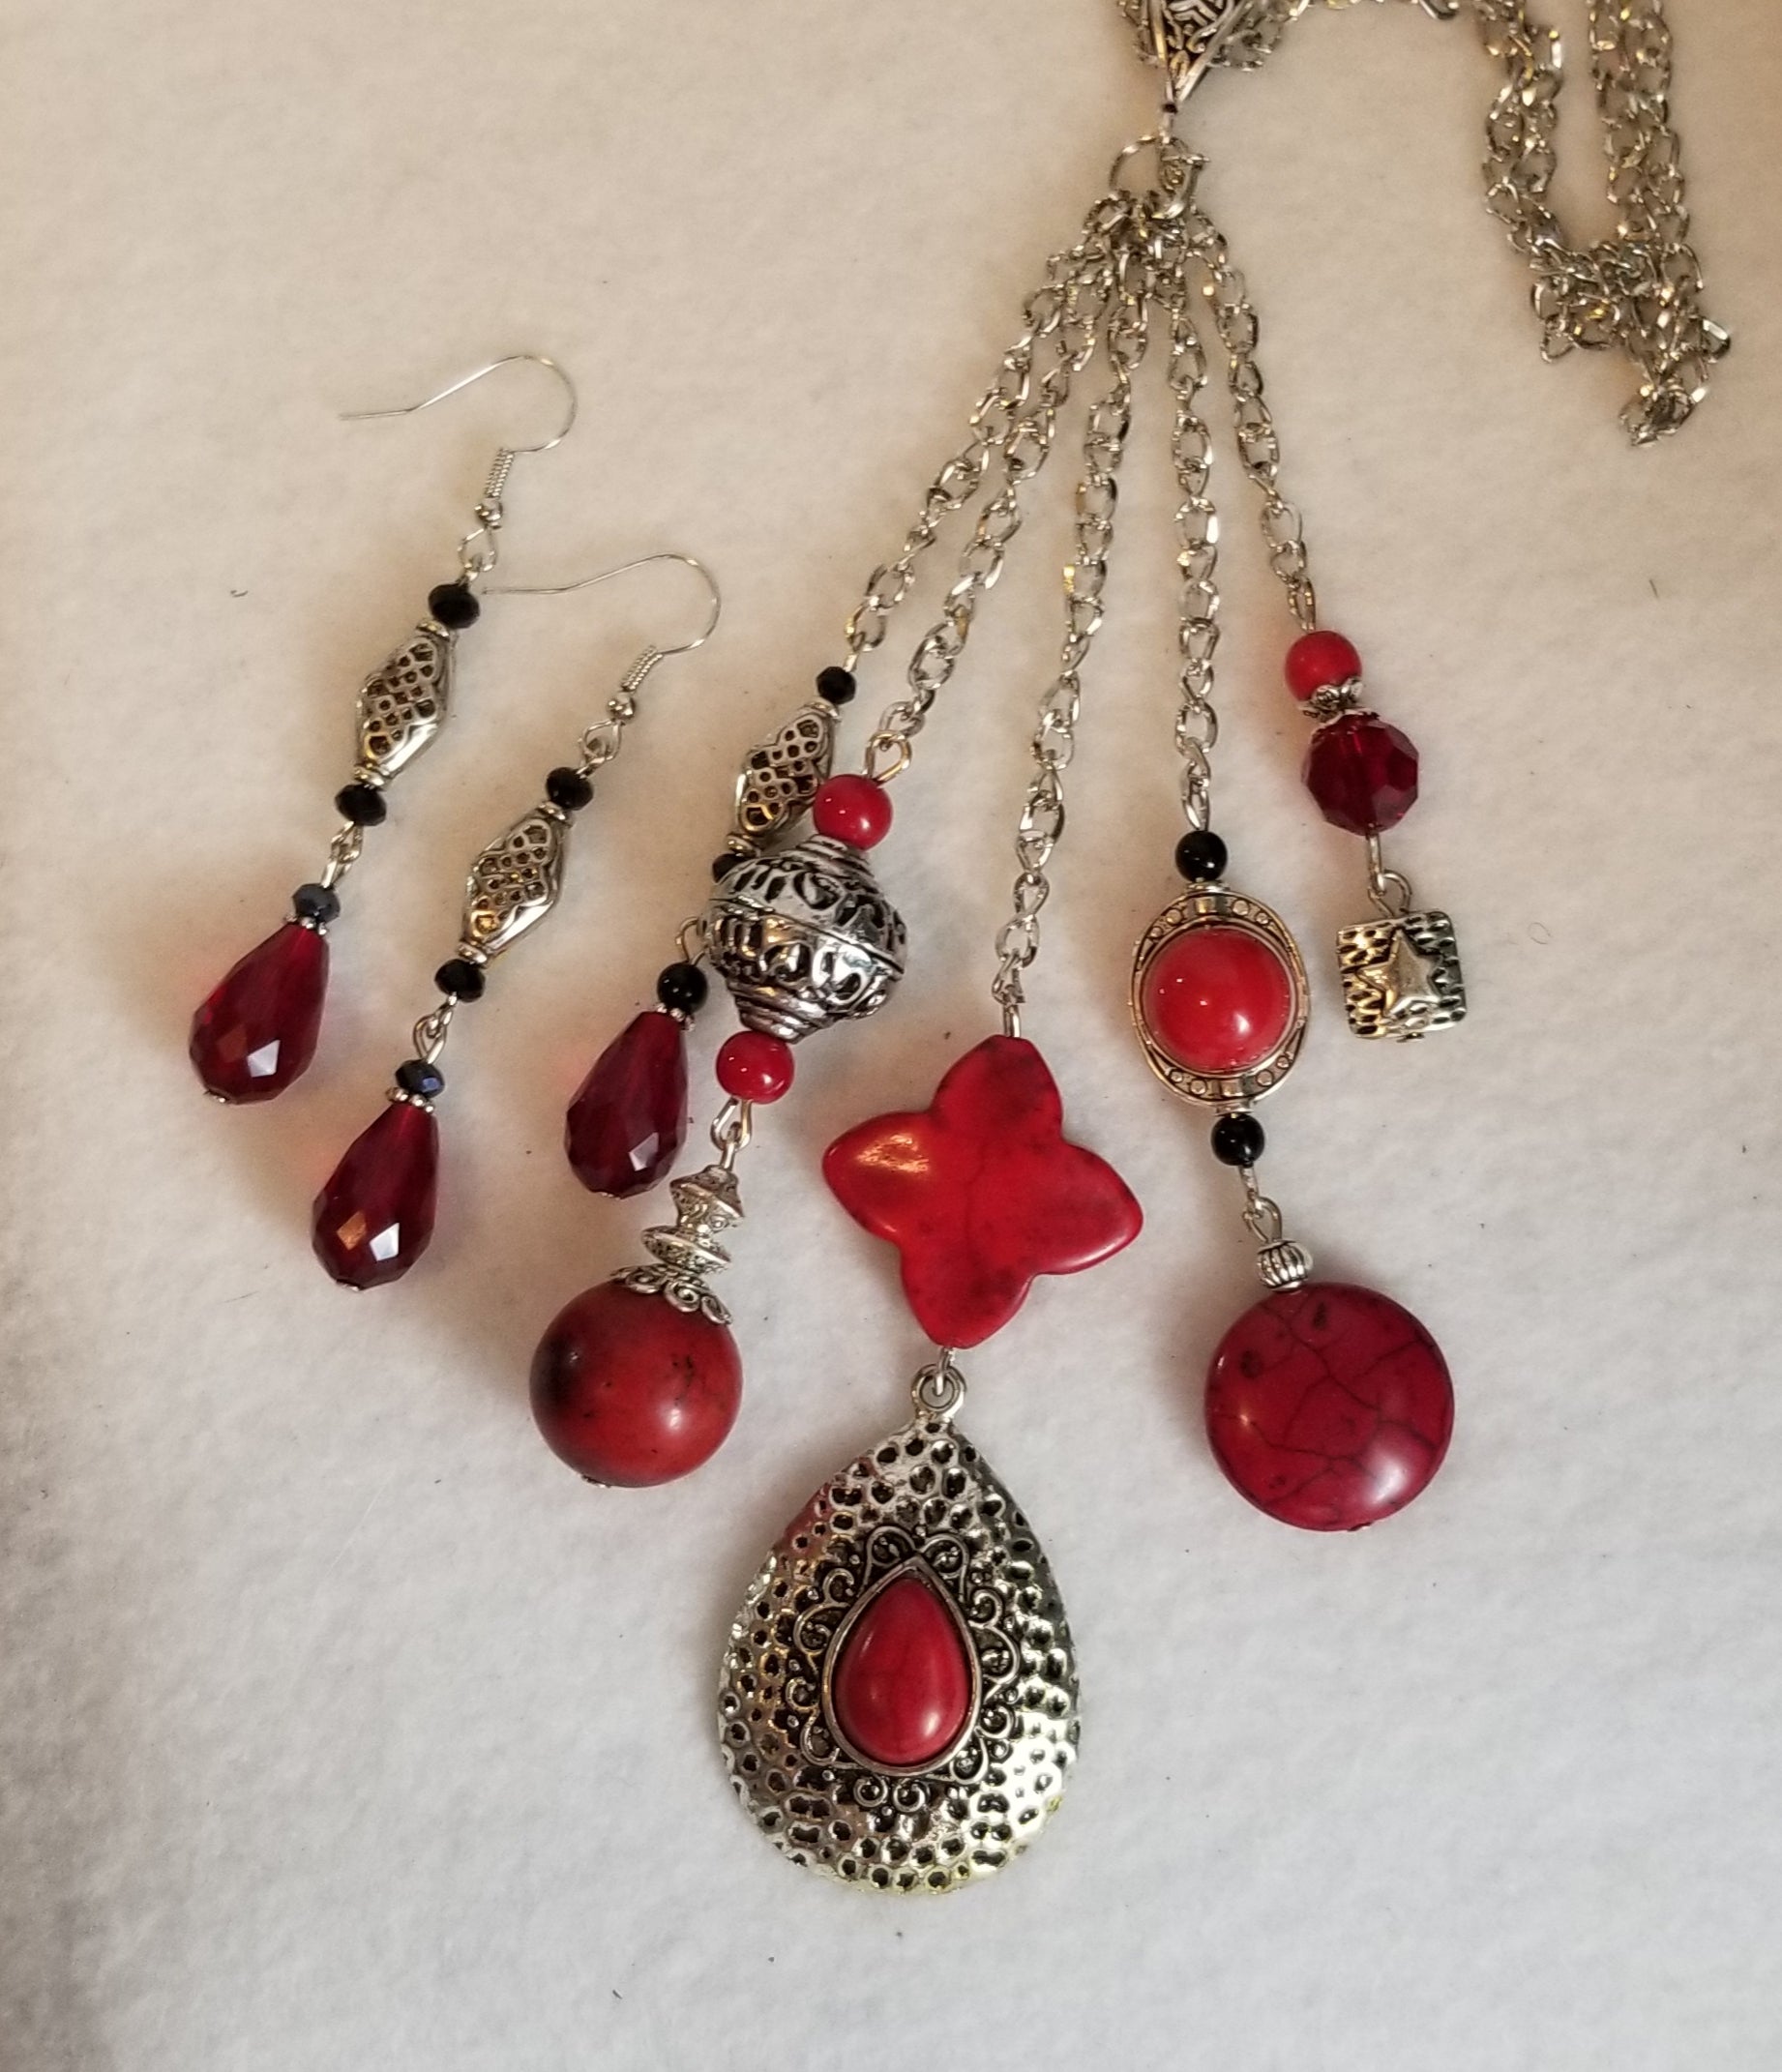 Hammered Red Necklace with Earrings